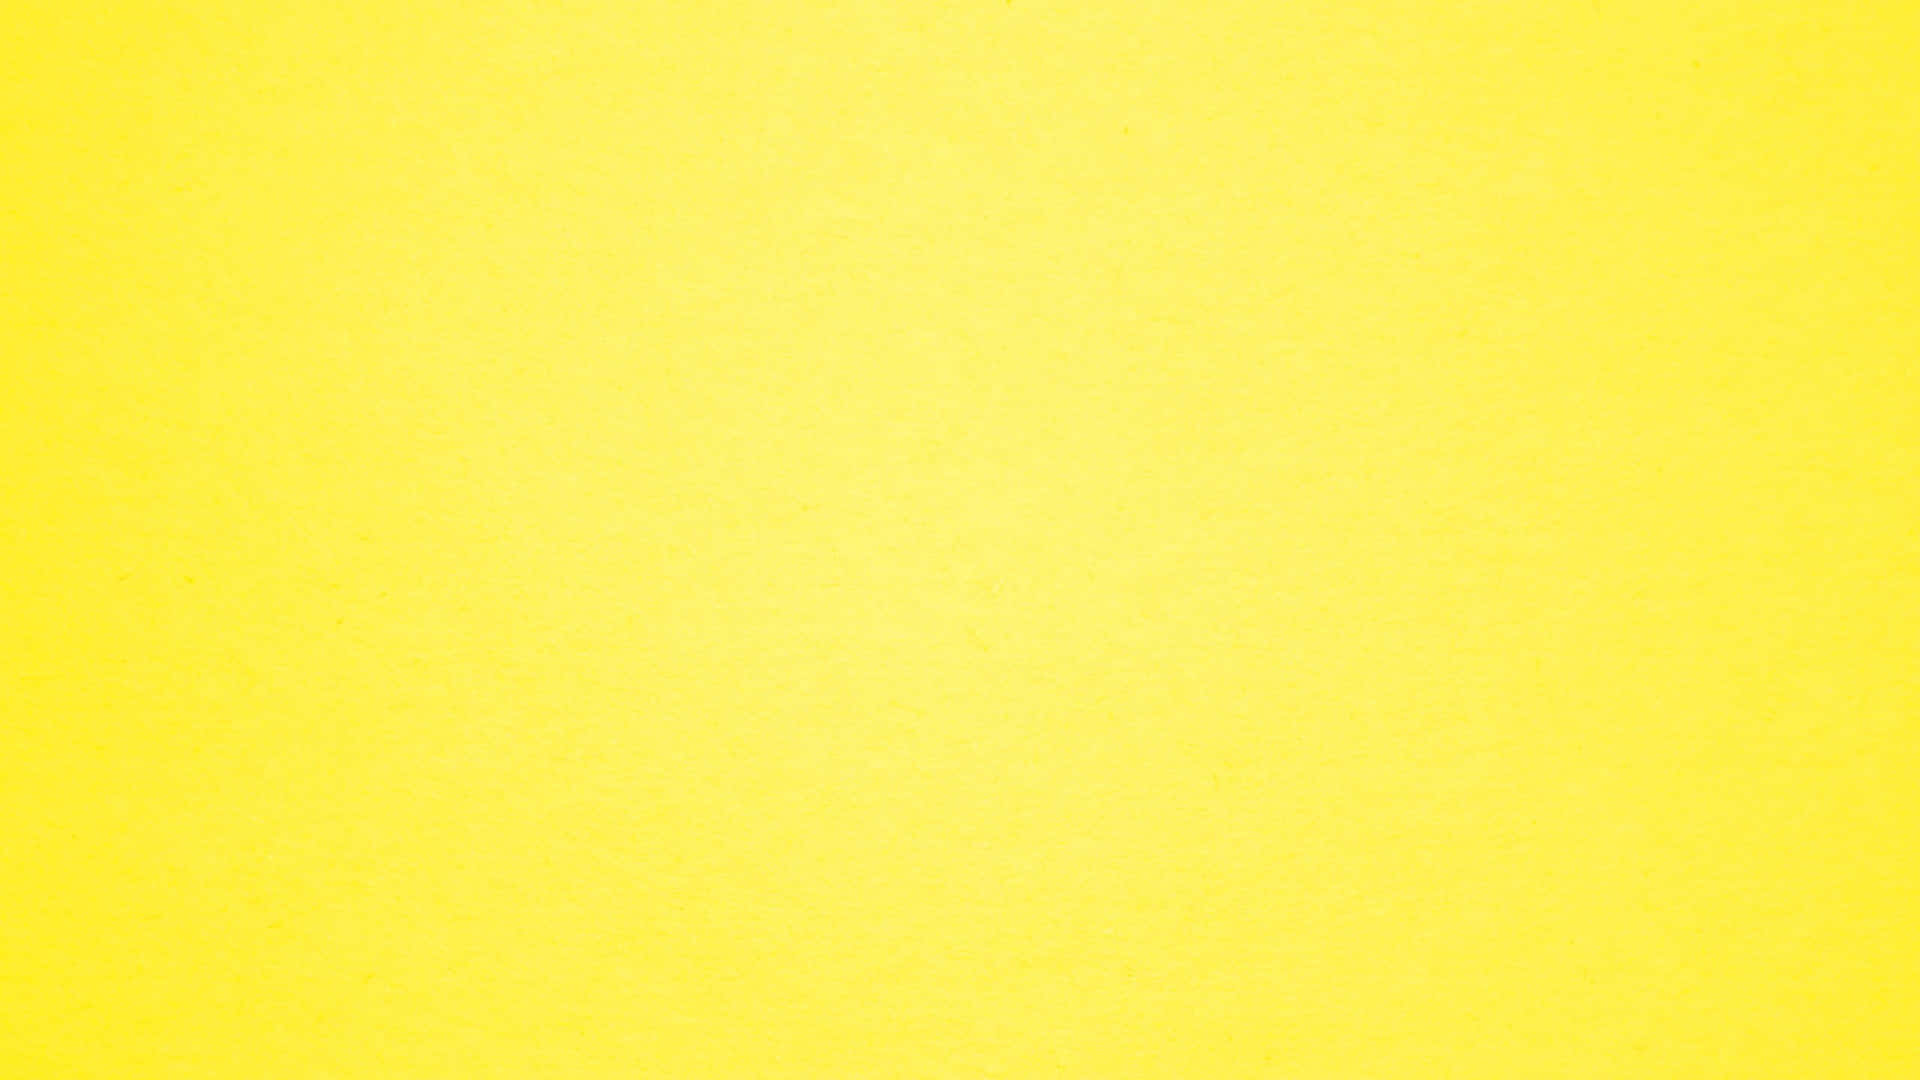 Solid Yellow